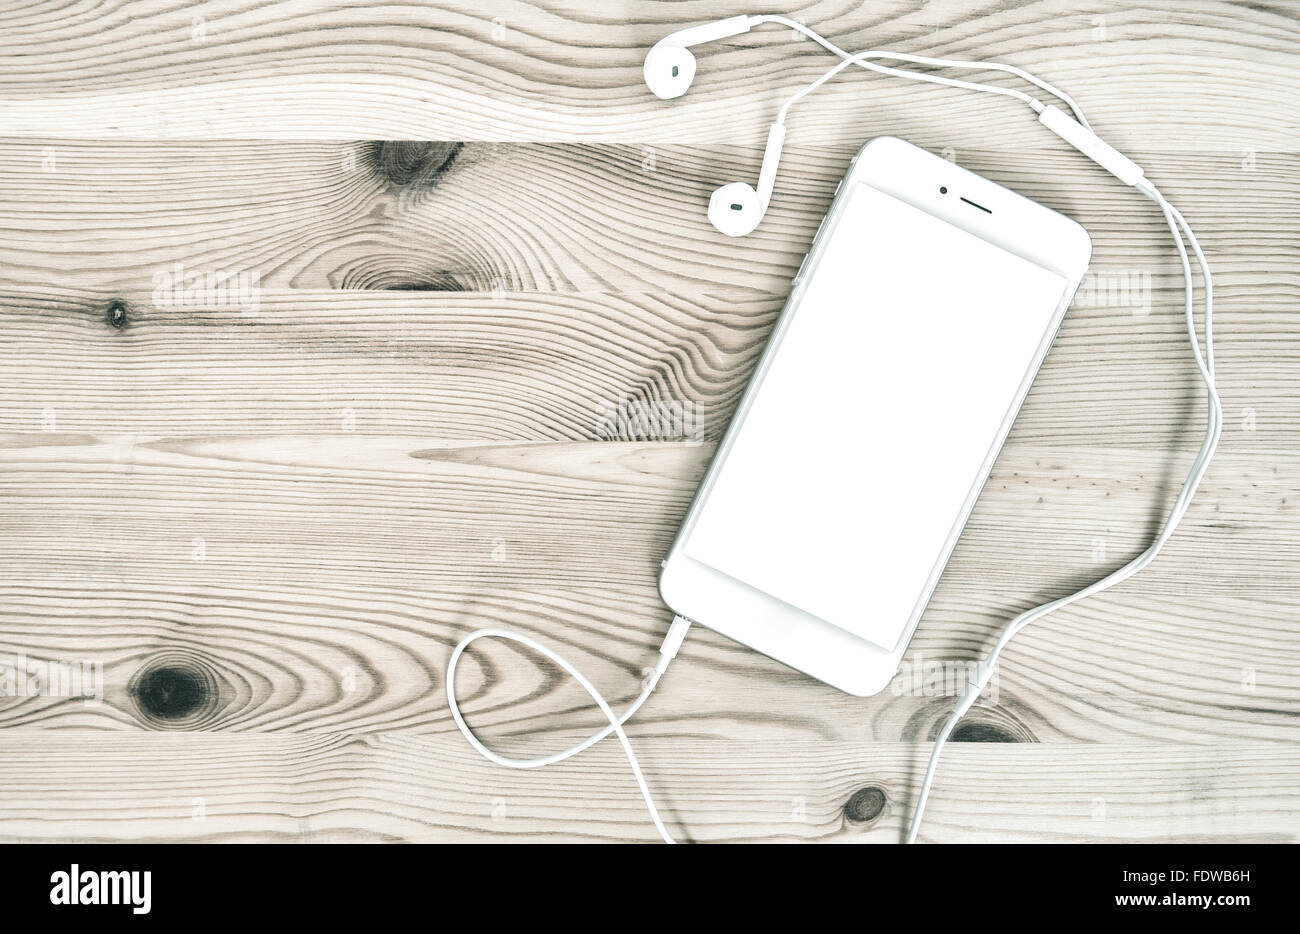 Digital phone with headphones on wooden background Stock Photo